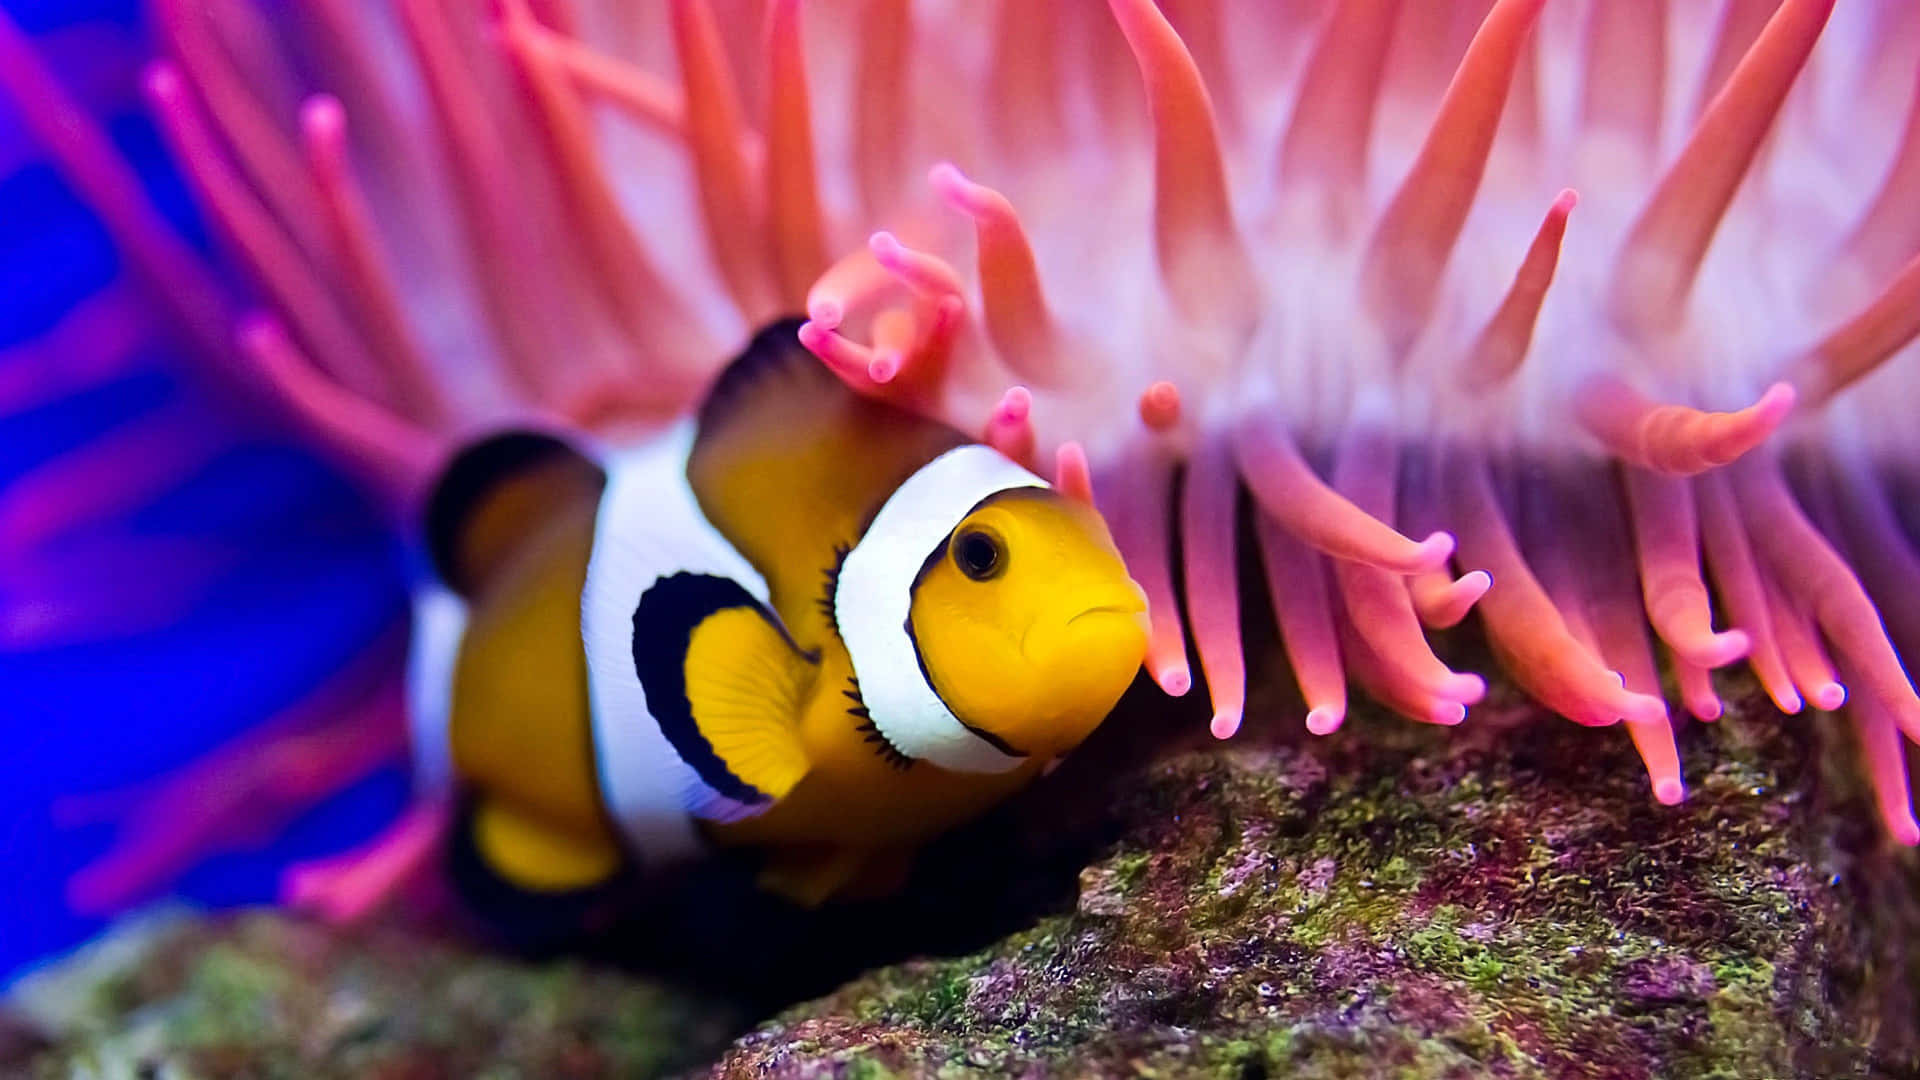 Clownfish In An Aquarium With Anemones